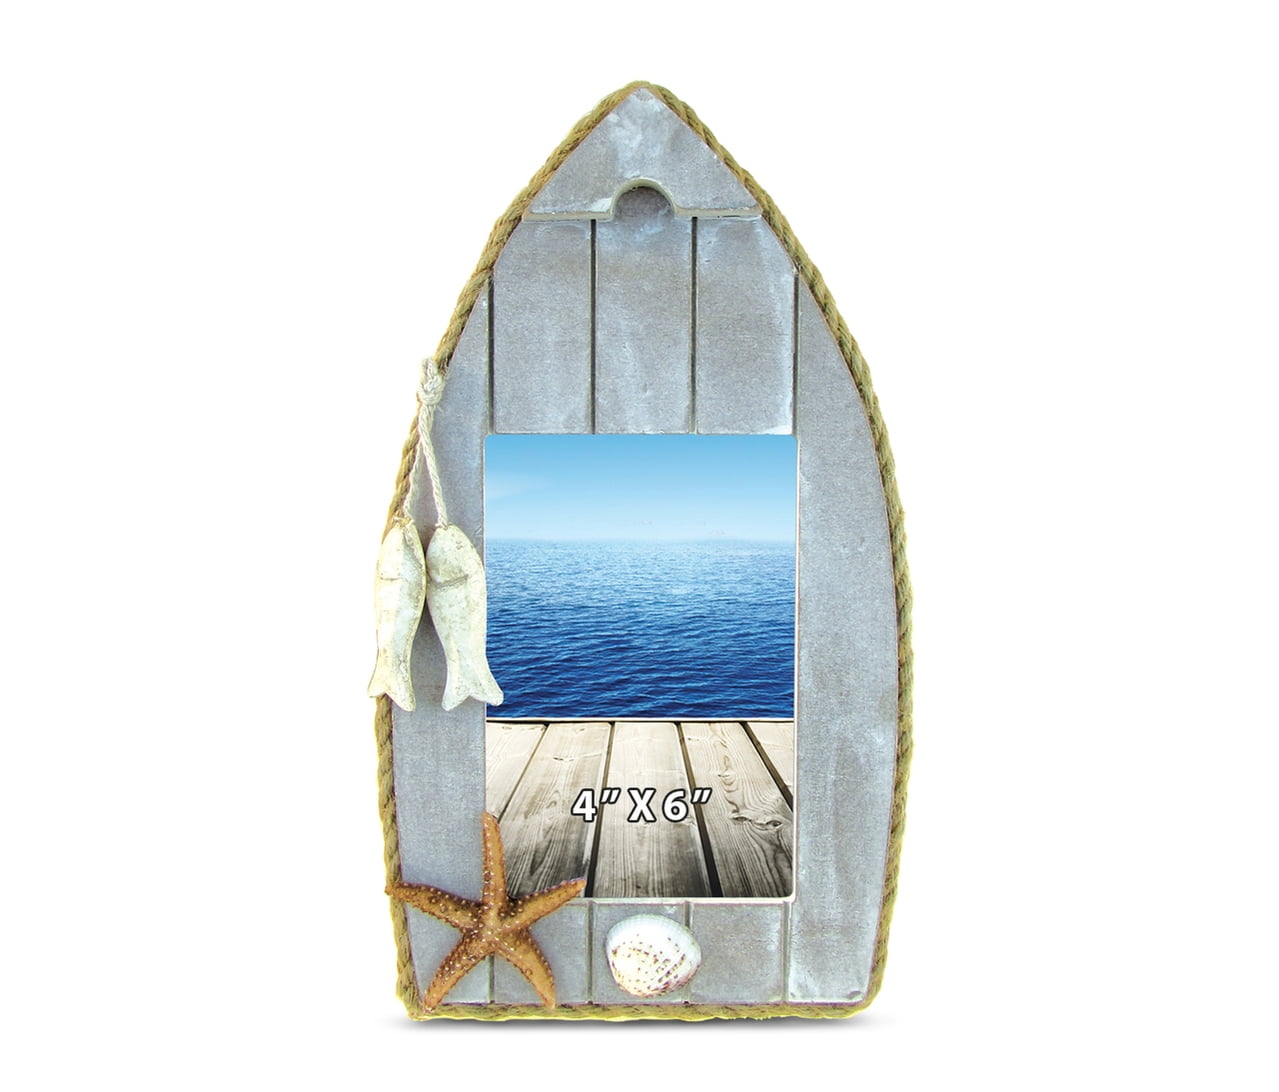 PuzzledBlue Ship and Lighthouse Photo Frame 4"x6" Nautical Picture Frame 